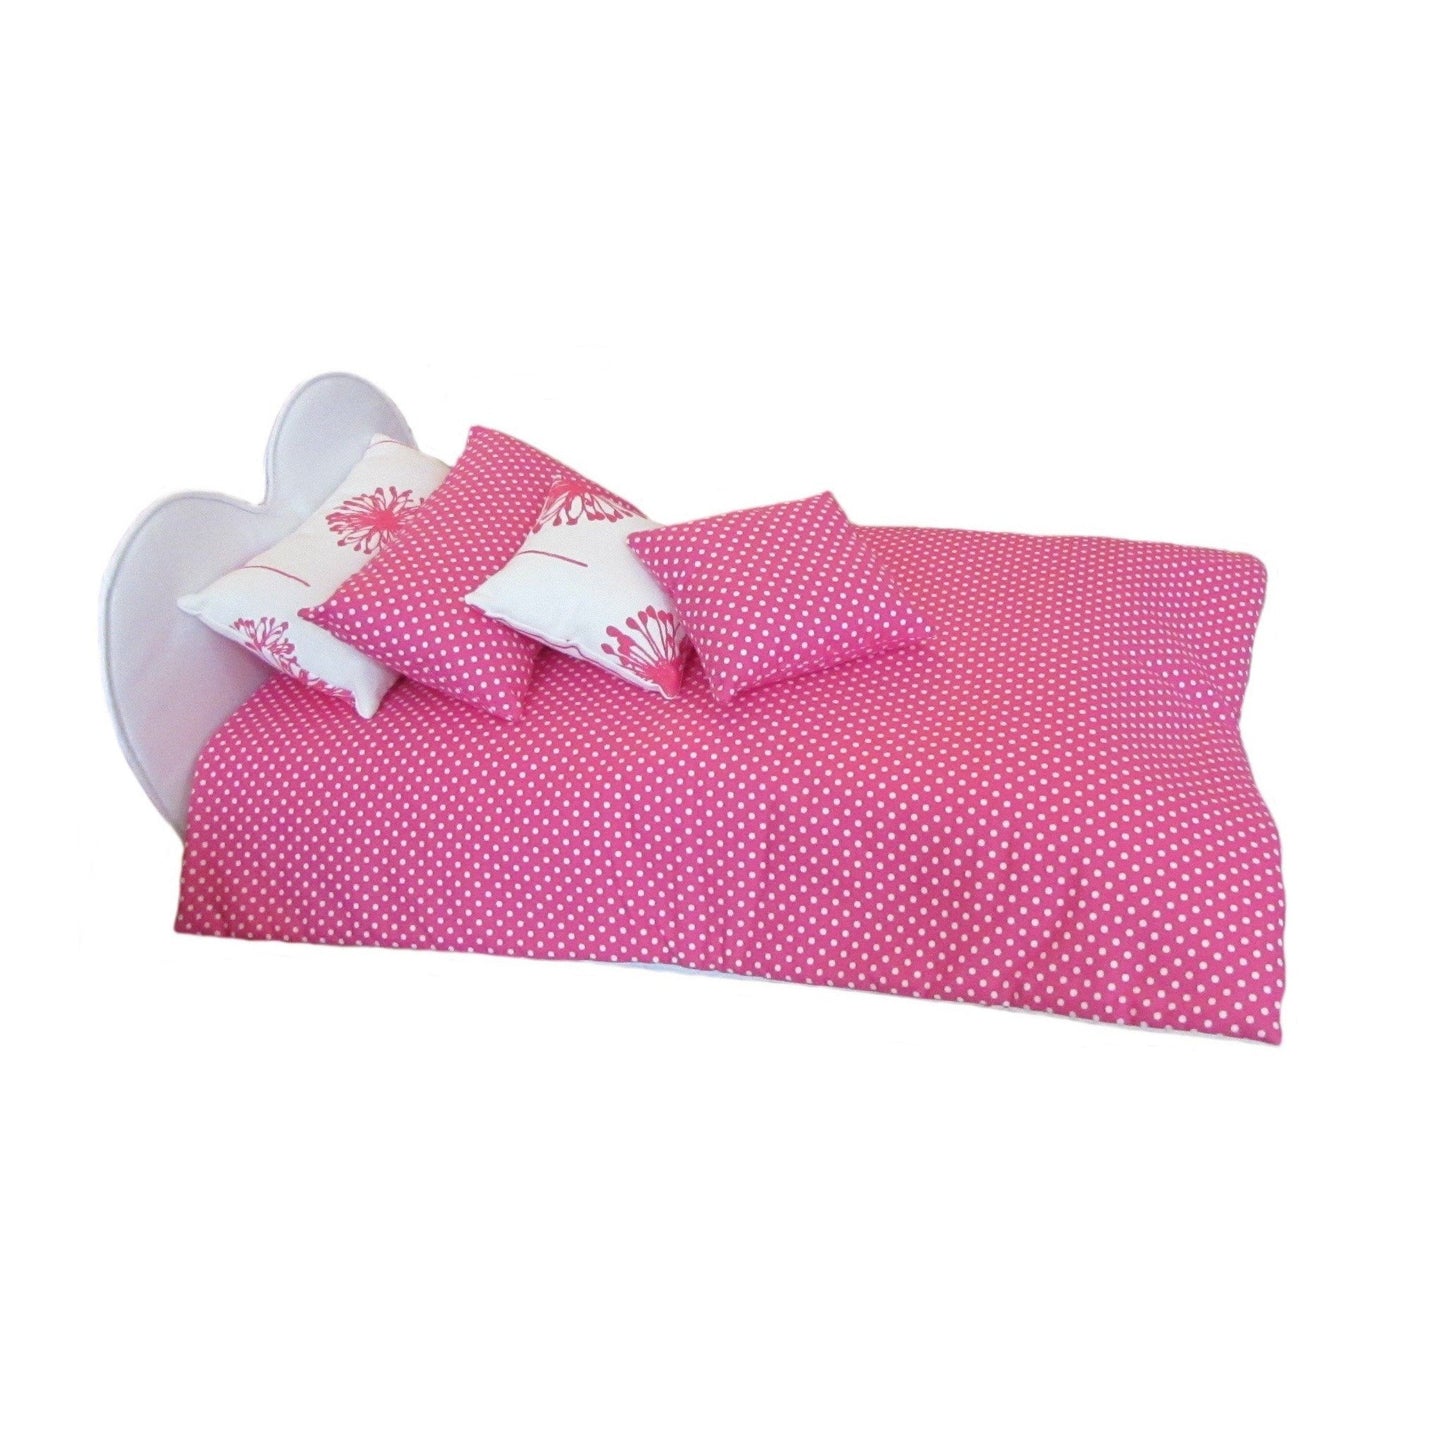 Candy Pink Dandelion Doll Pillows, White Dots on Pink Doll Comforter, and White Heart Doll Bed for 18-inch dolls